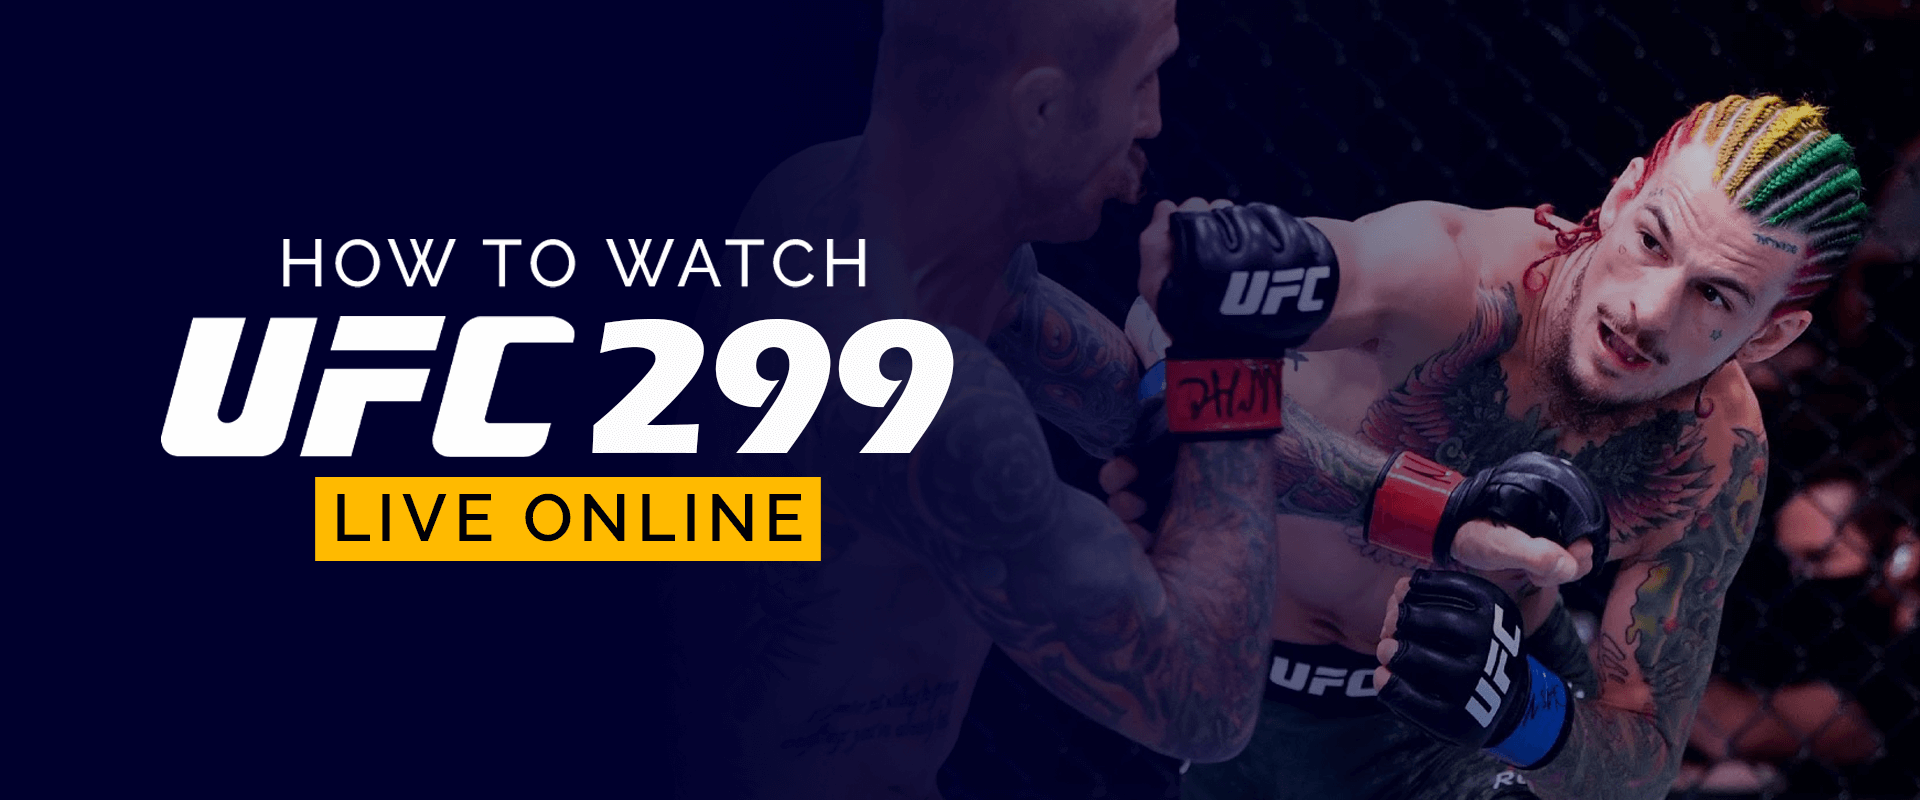 How to Watch UFC 299 Live Online